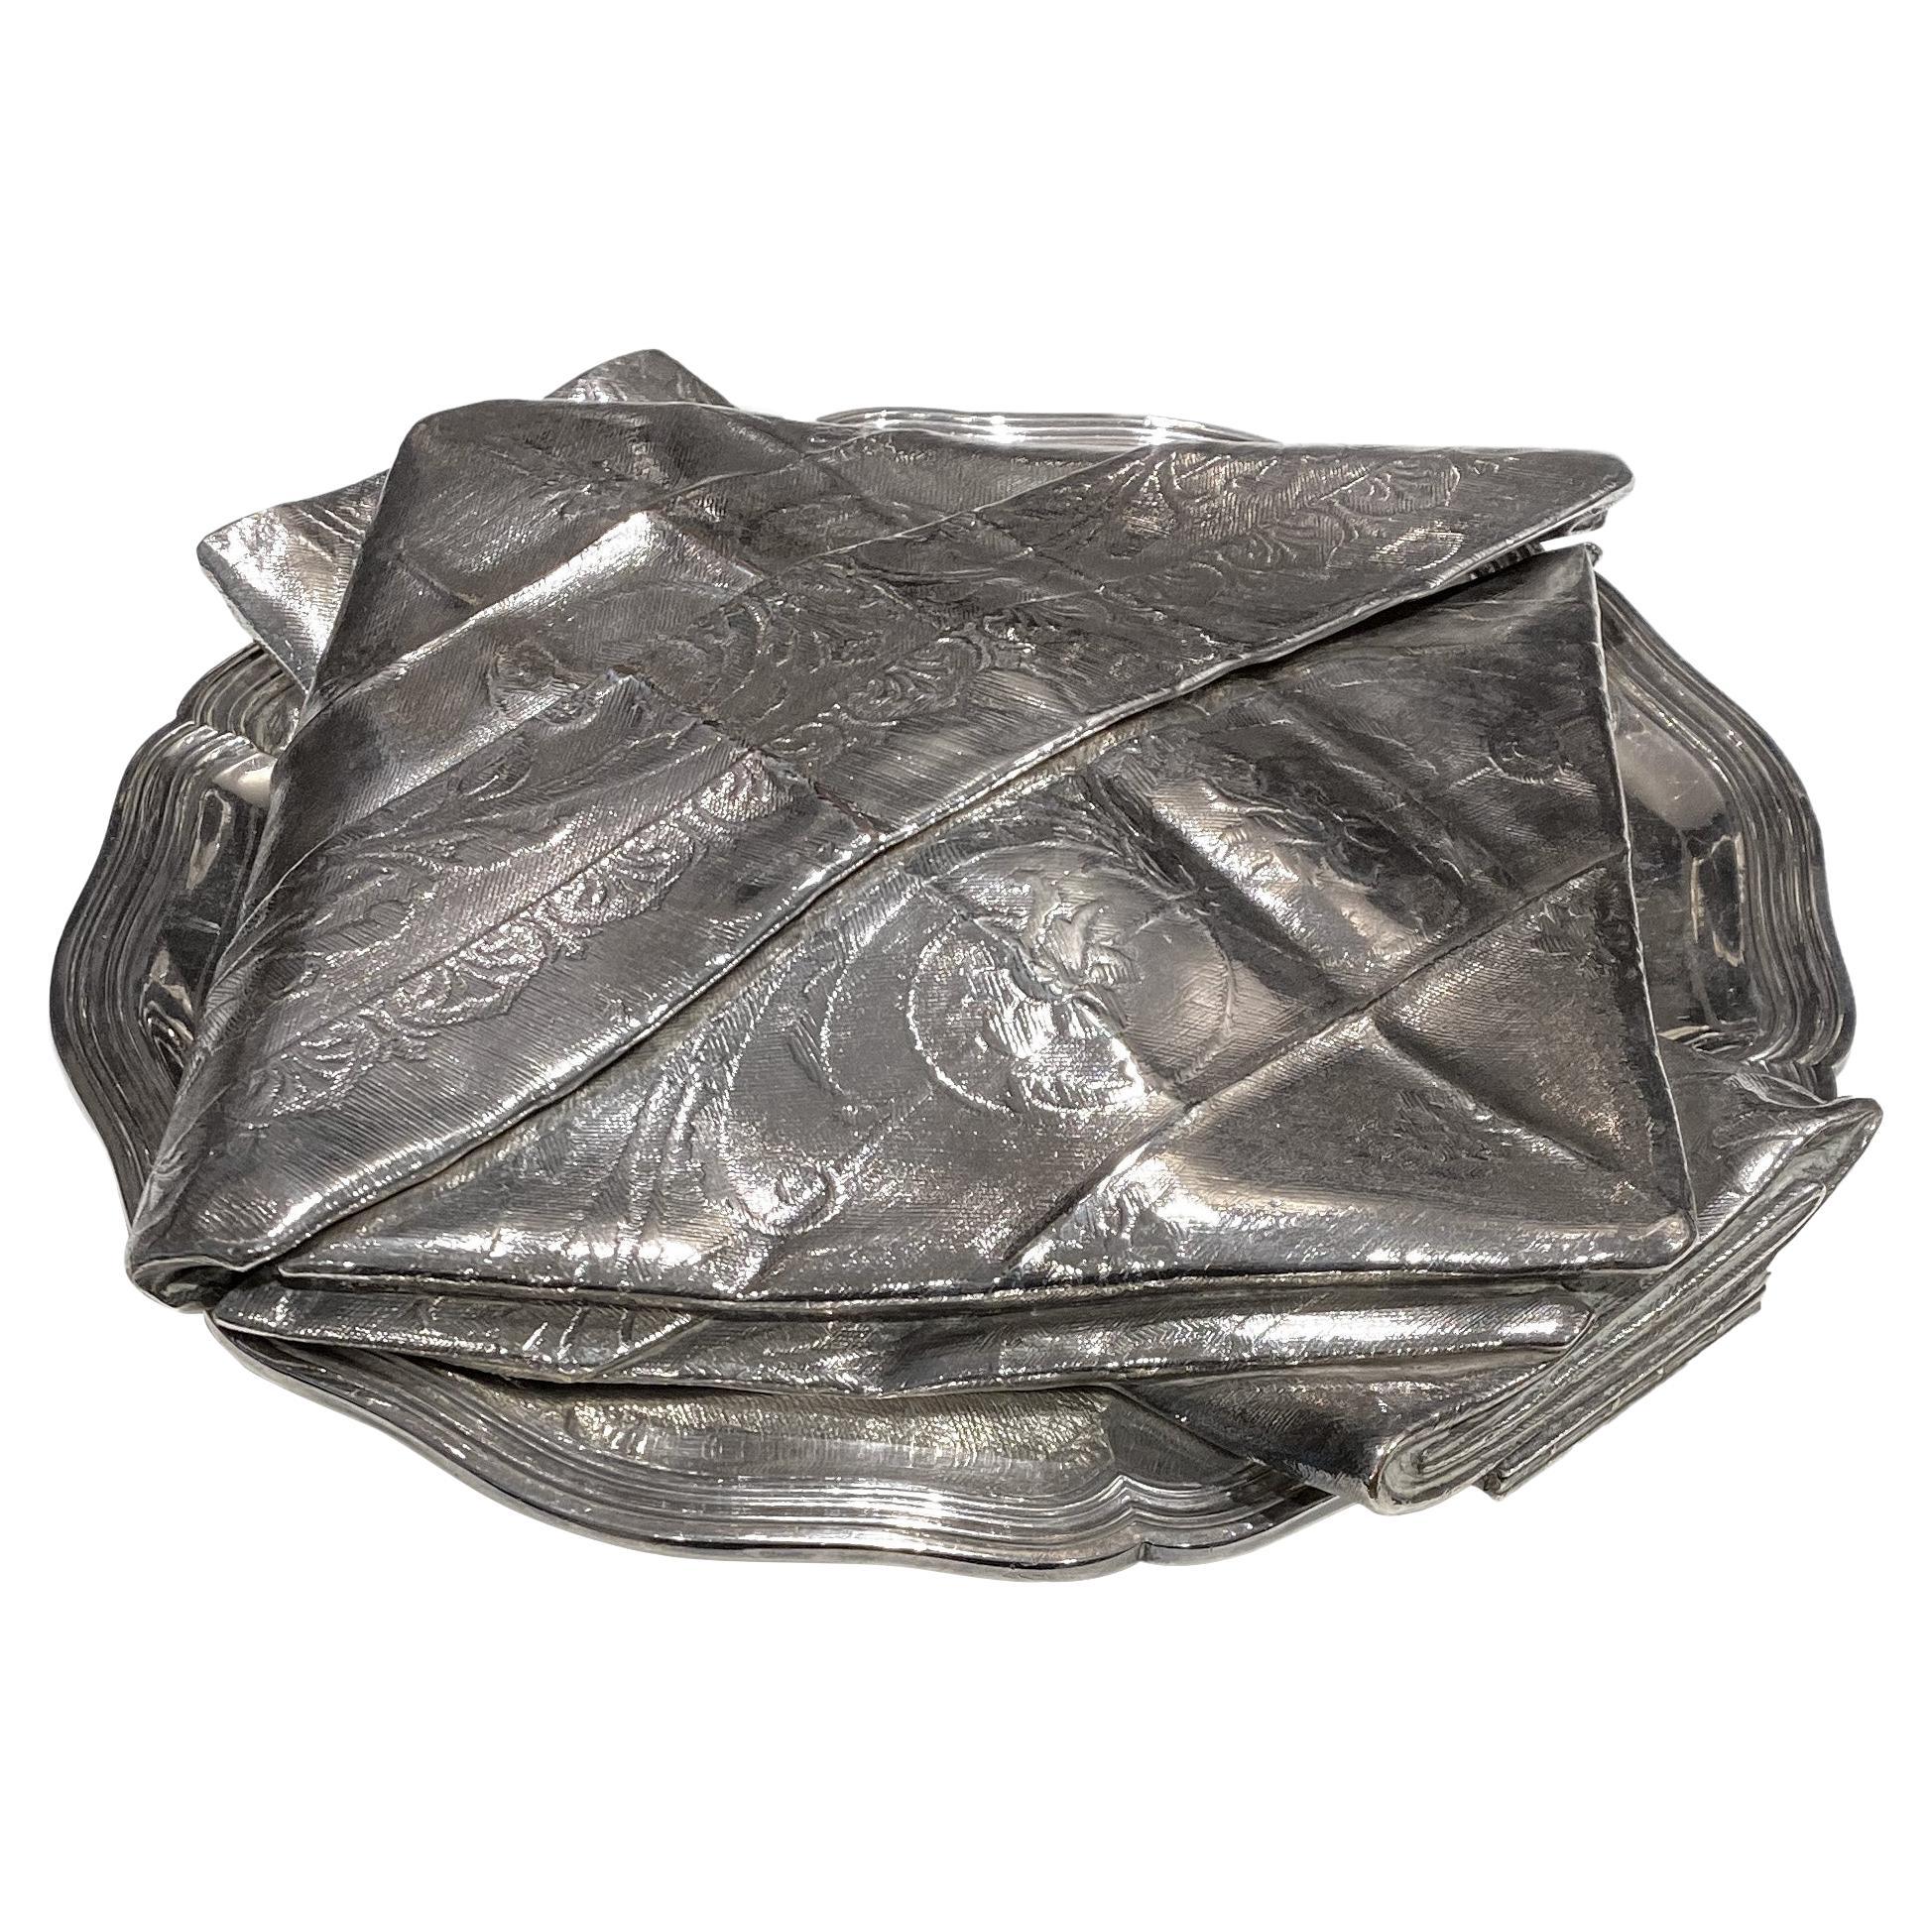 Chistofle "trompe l'oeil" chestnuts dish, Silver plated, 19th century